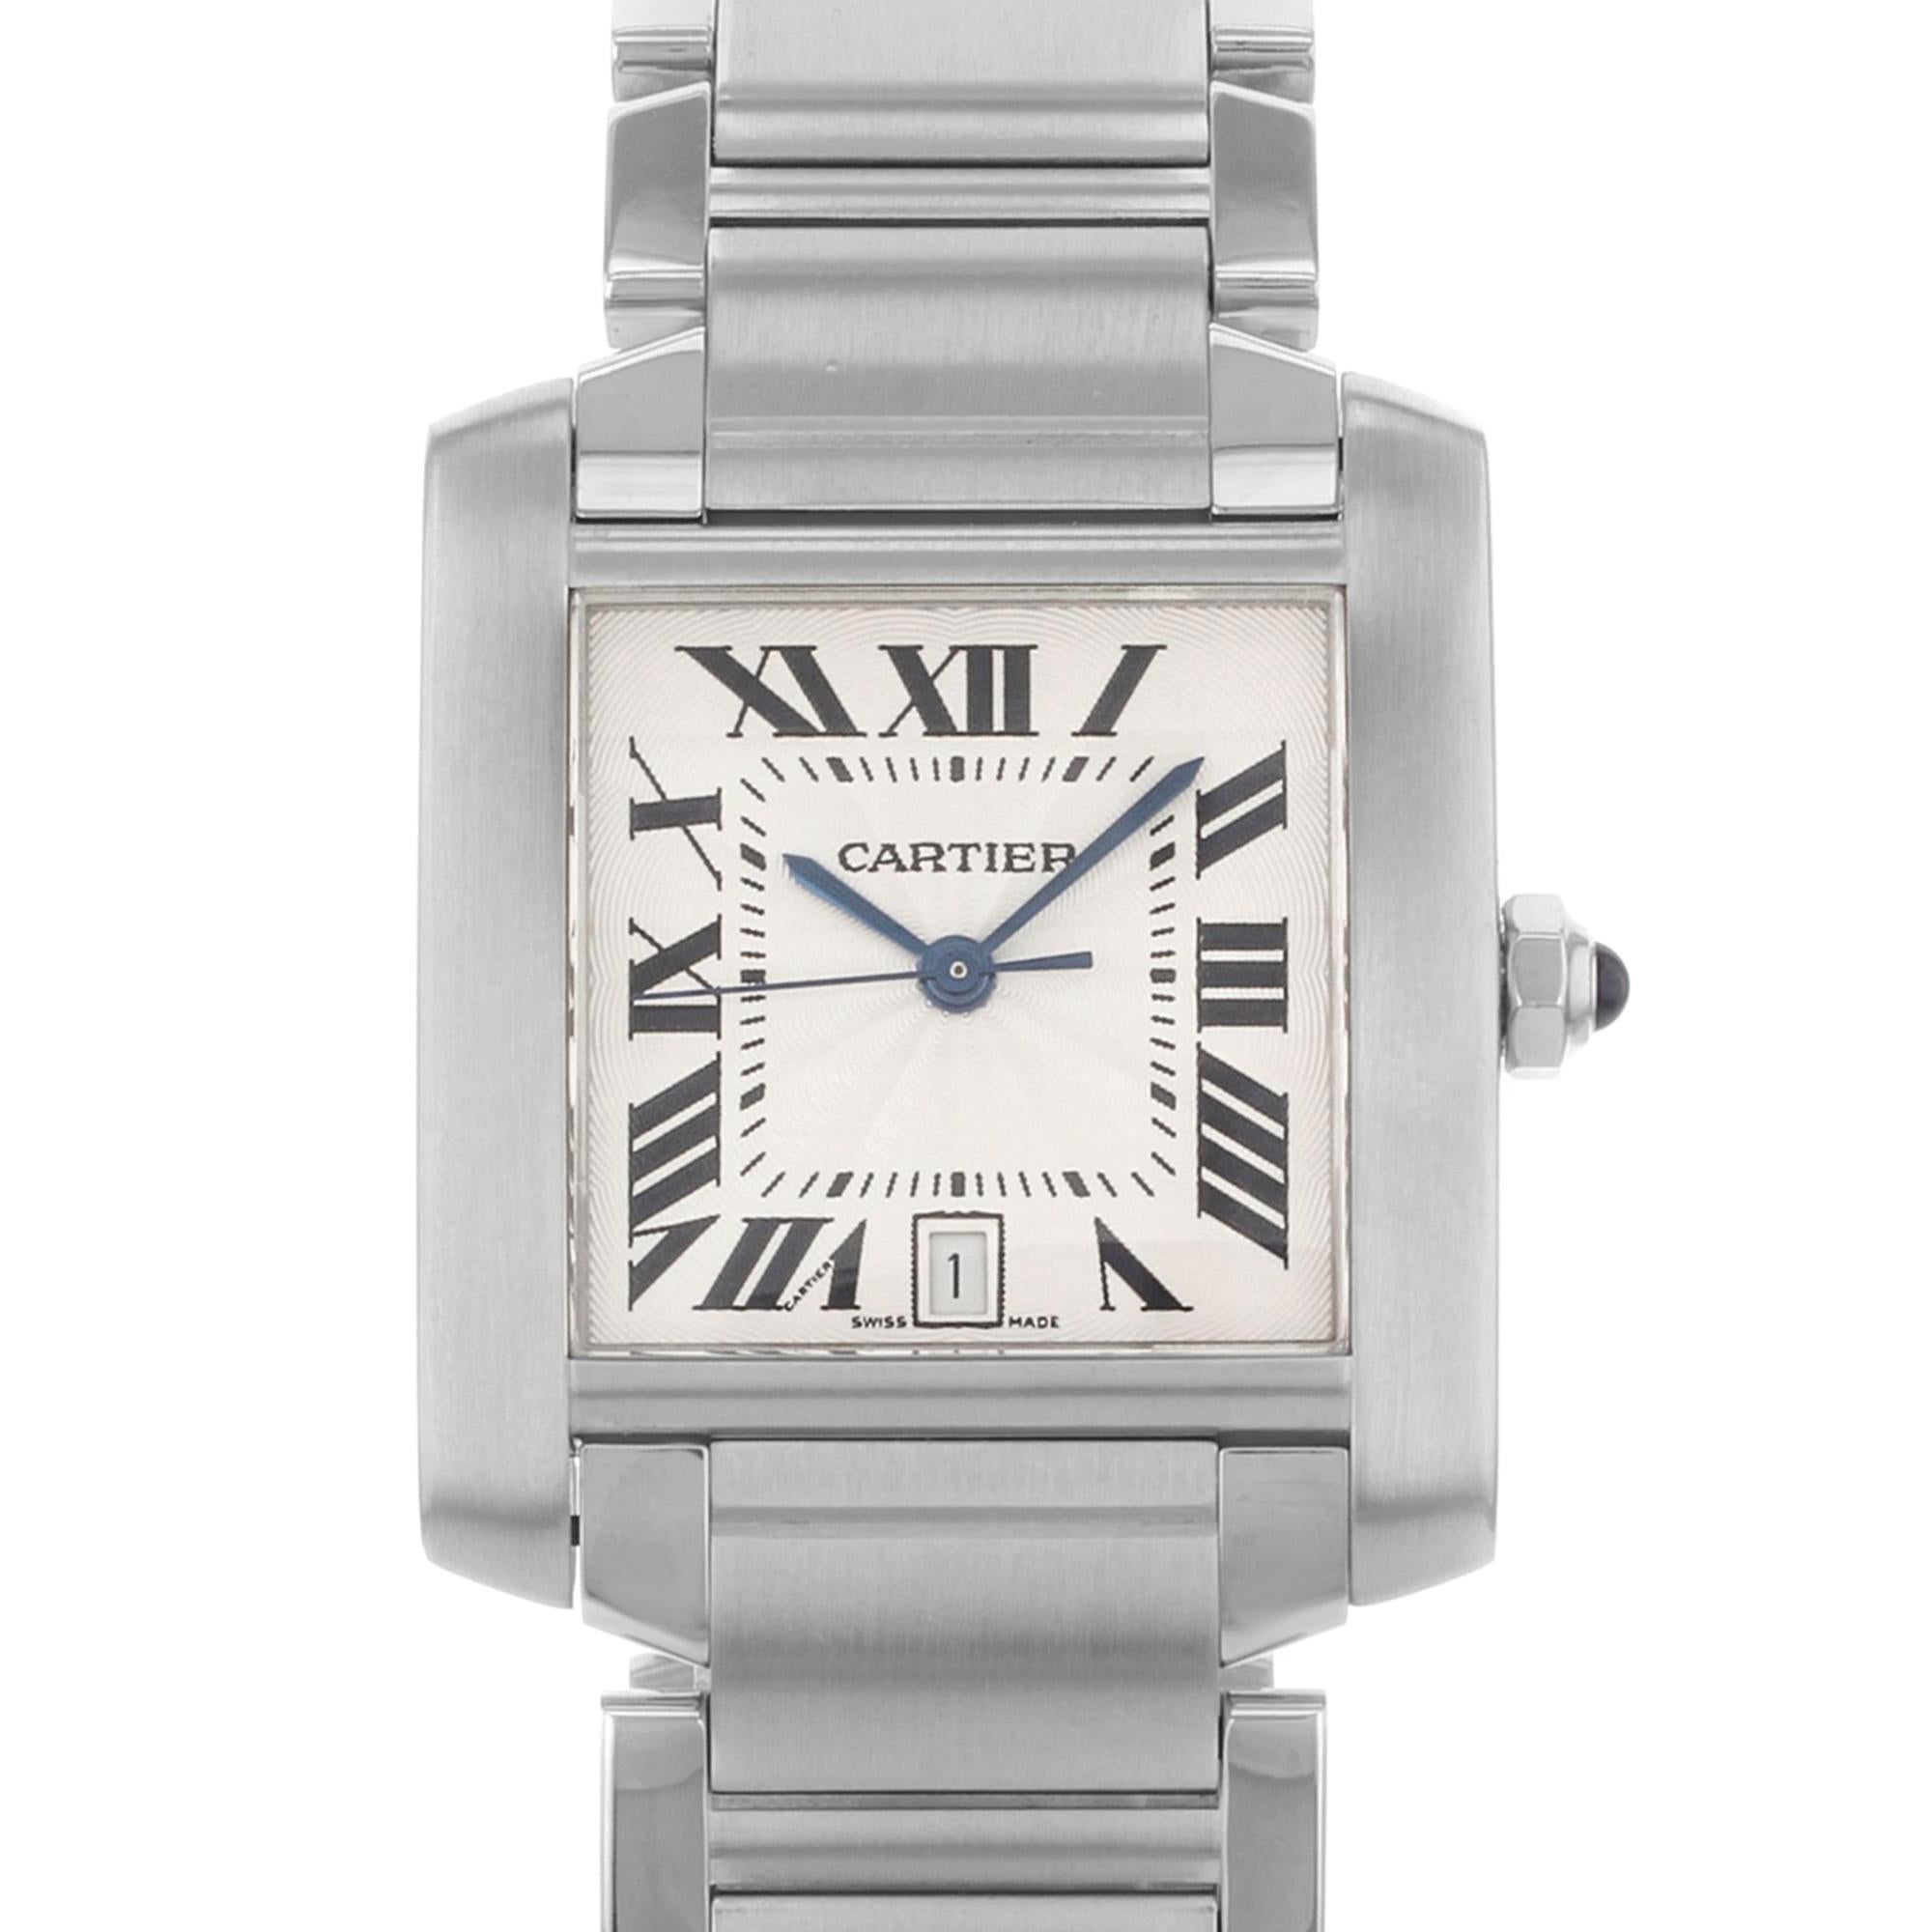 This pre-owned Cartier Tank W51002Q3 is a beautiful Unisex timepiece that is powered by an automatic movement which is cased in a stainless steel case. It has a rectangle shape face, date dial and has hand roman numerals style markers. It is